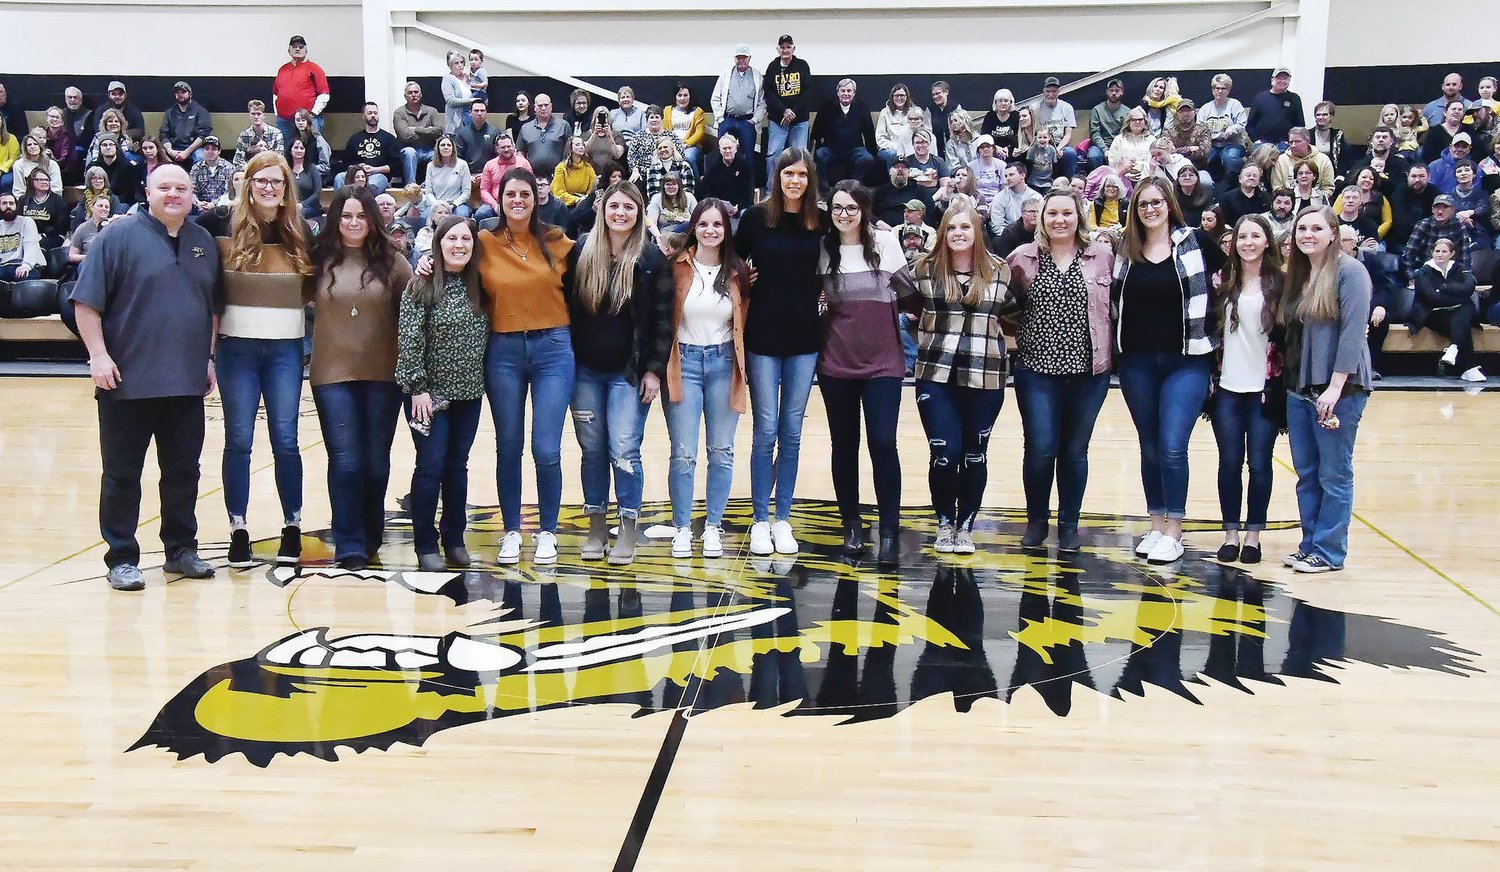 Members of the 2007 state champion softball team and 2007-08 state champion girls basketball team were honored during a ceremony between the girls and boys games Friday in Cairo.